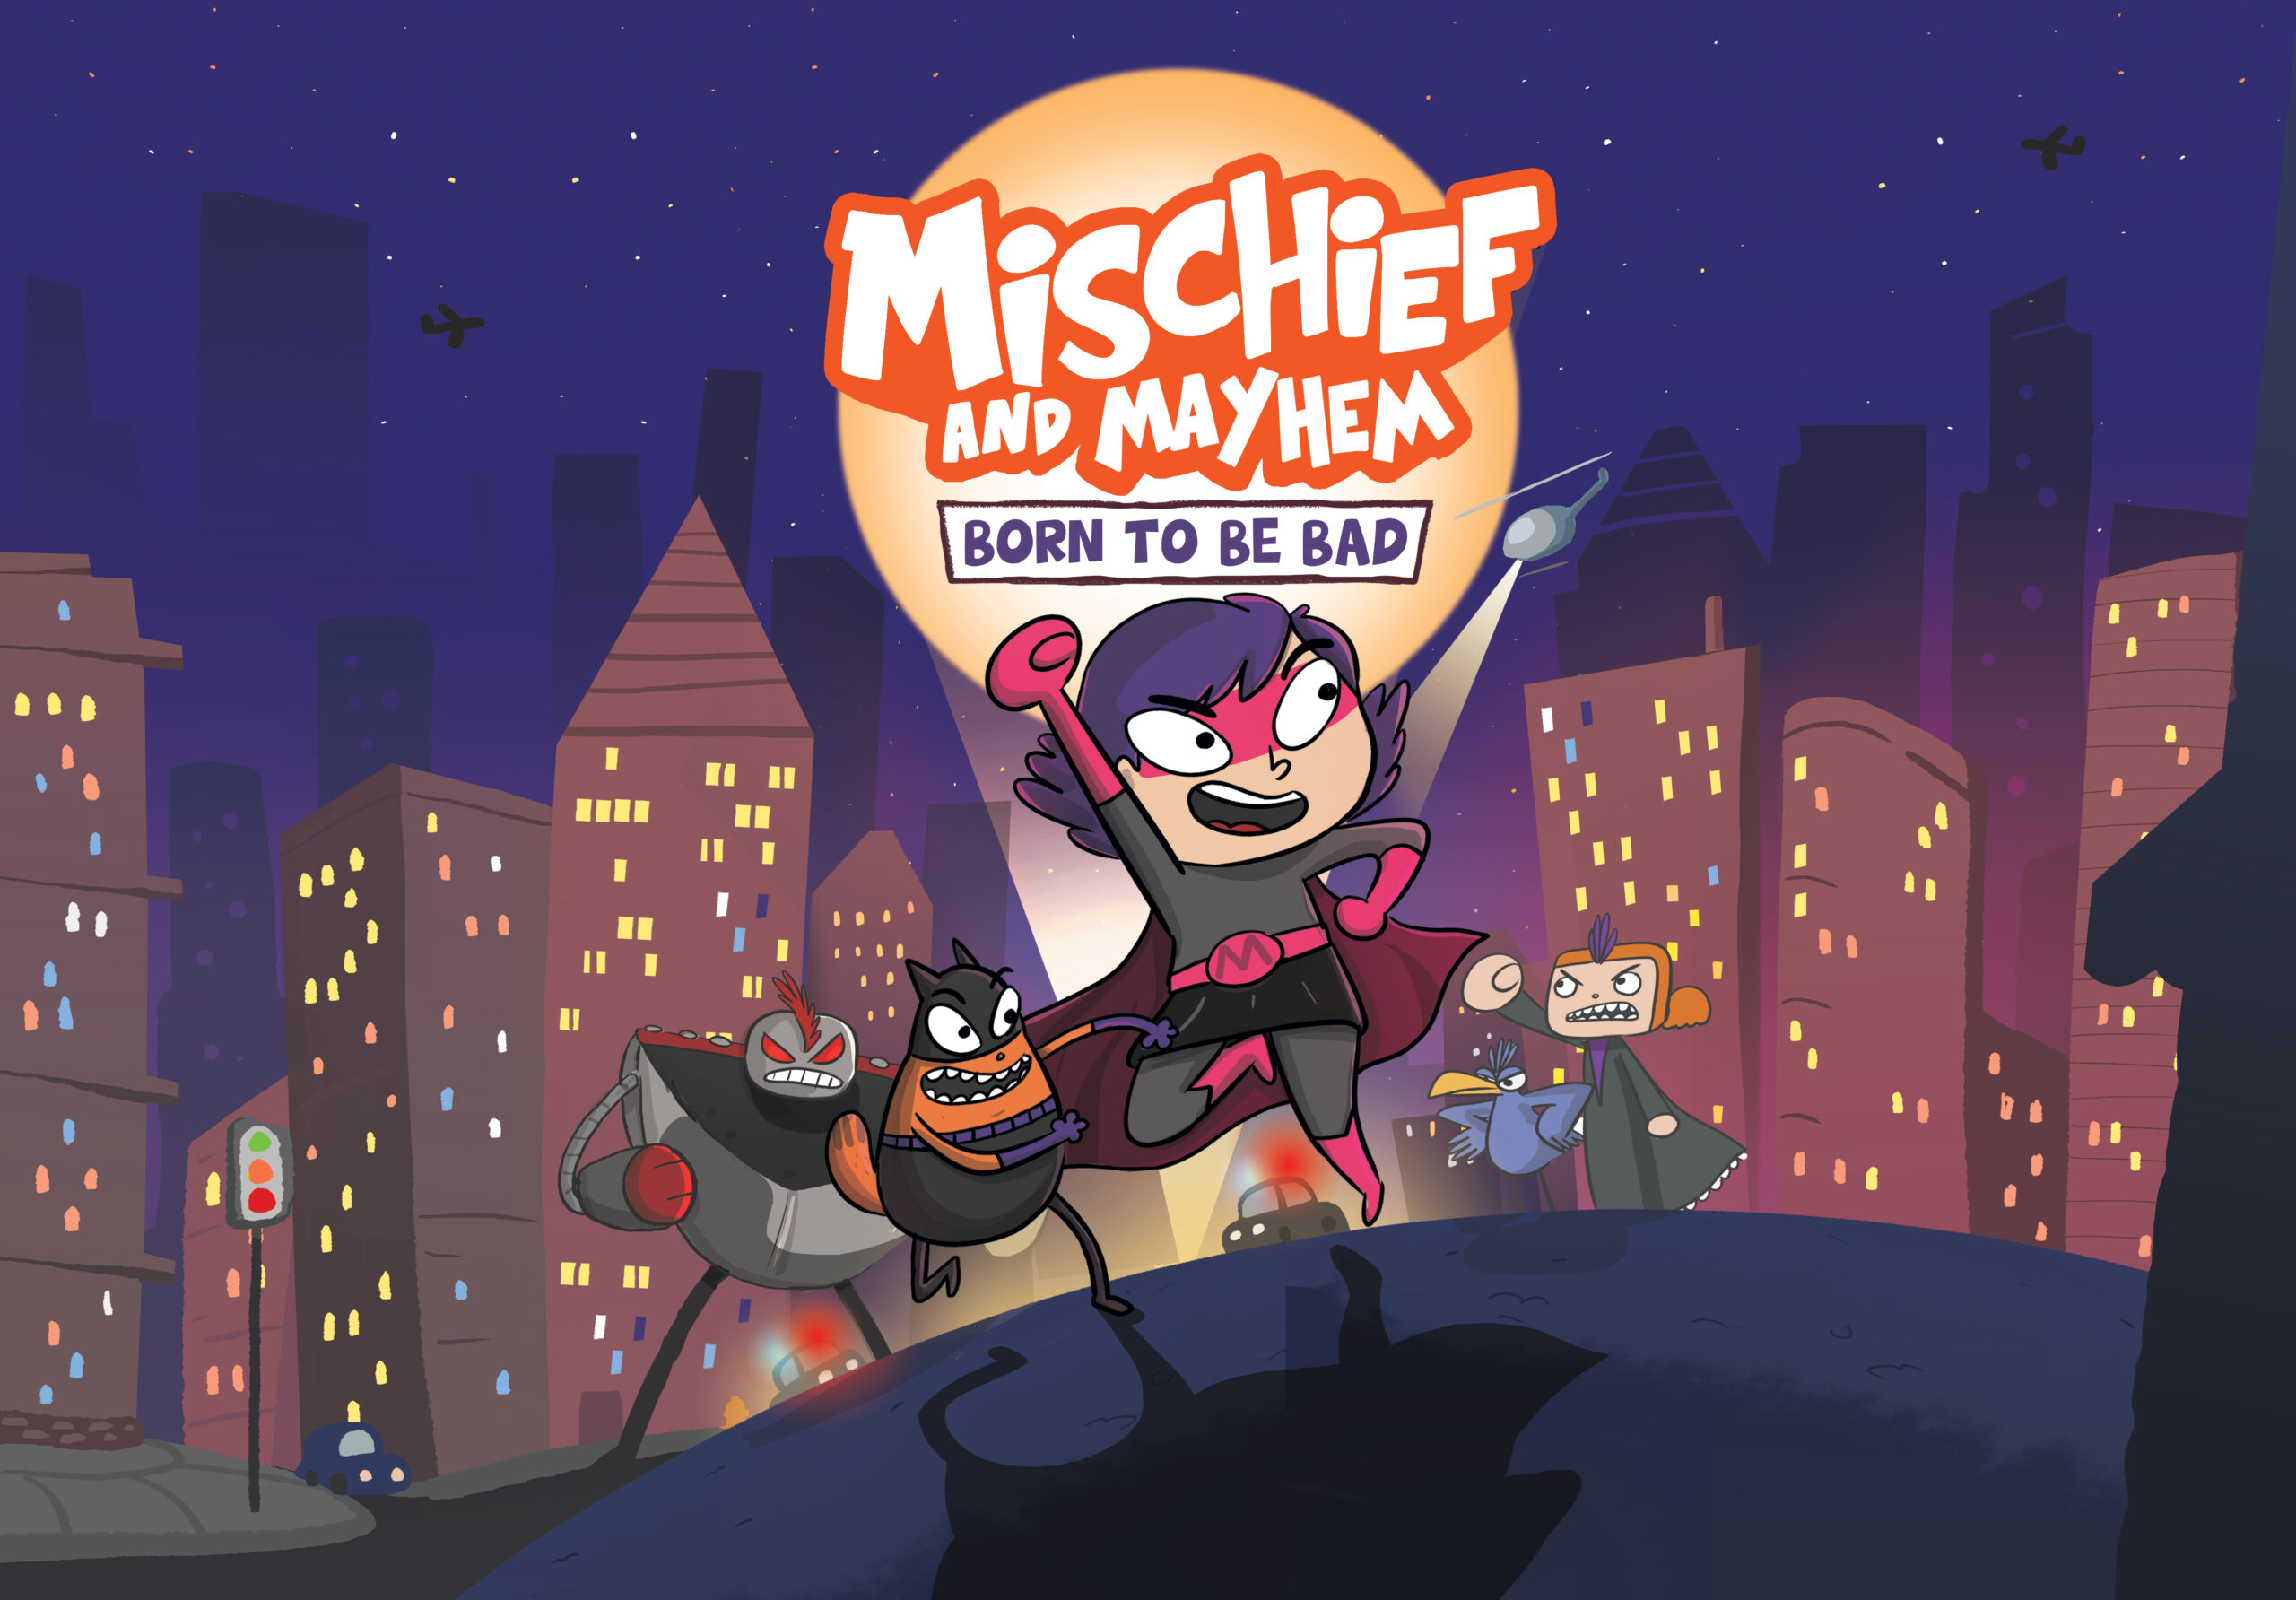 Mischief and Mayhem #1 Born To Be Bad Free Wallpaper Downloads